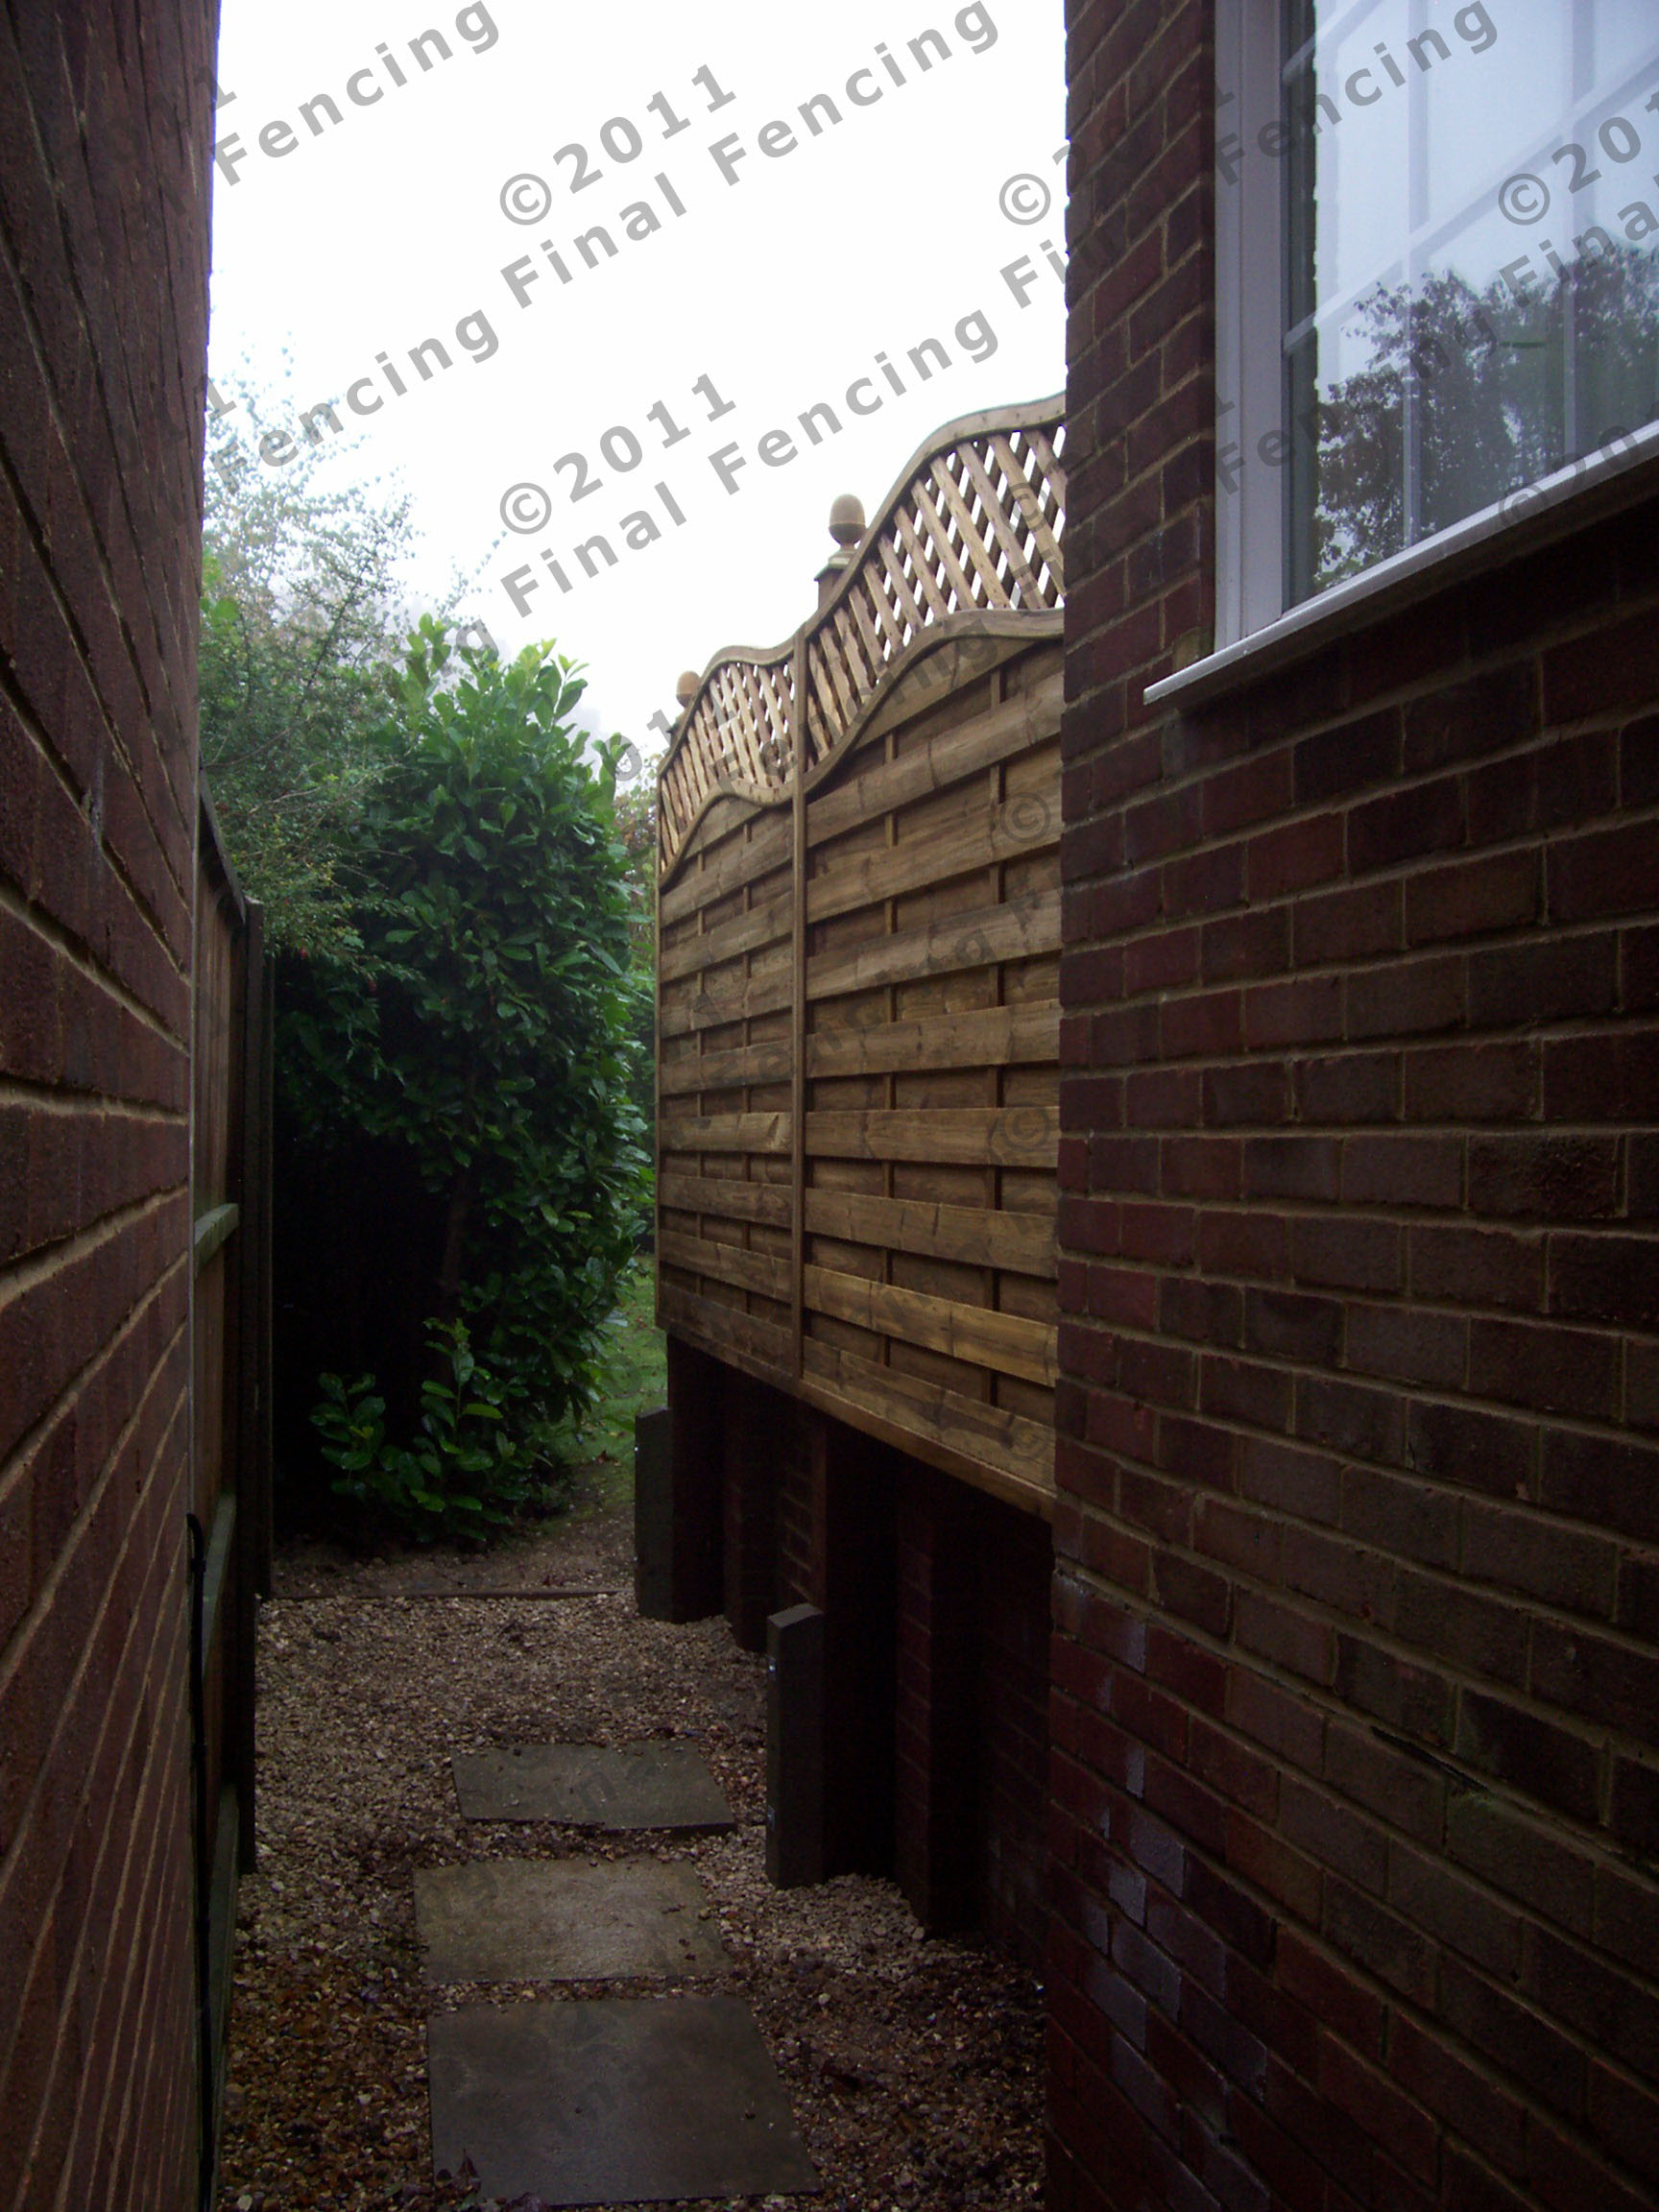 Fitted to brickwork